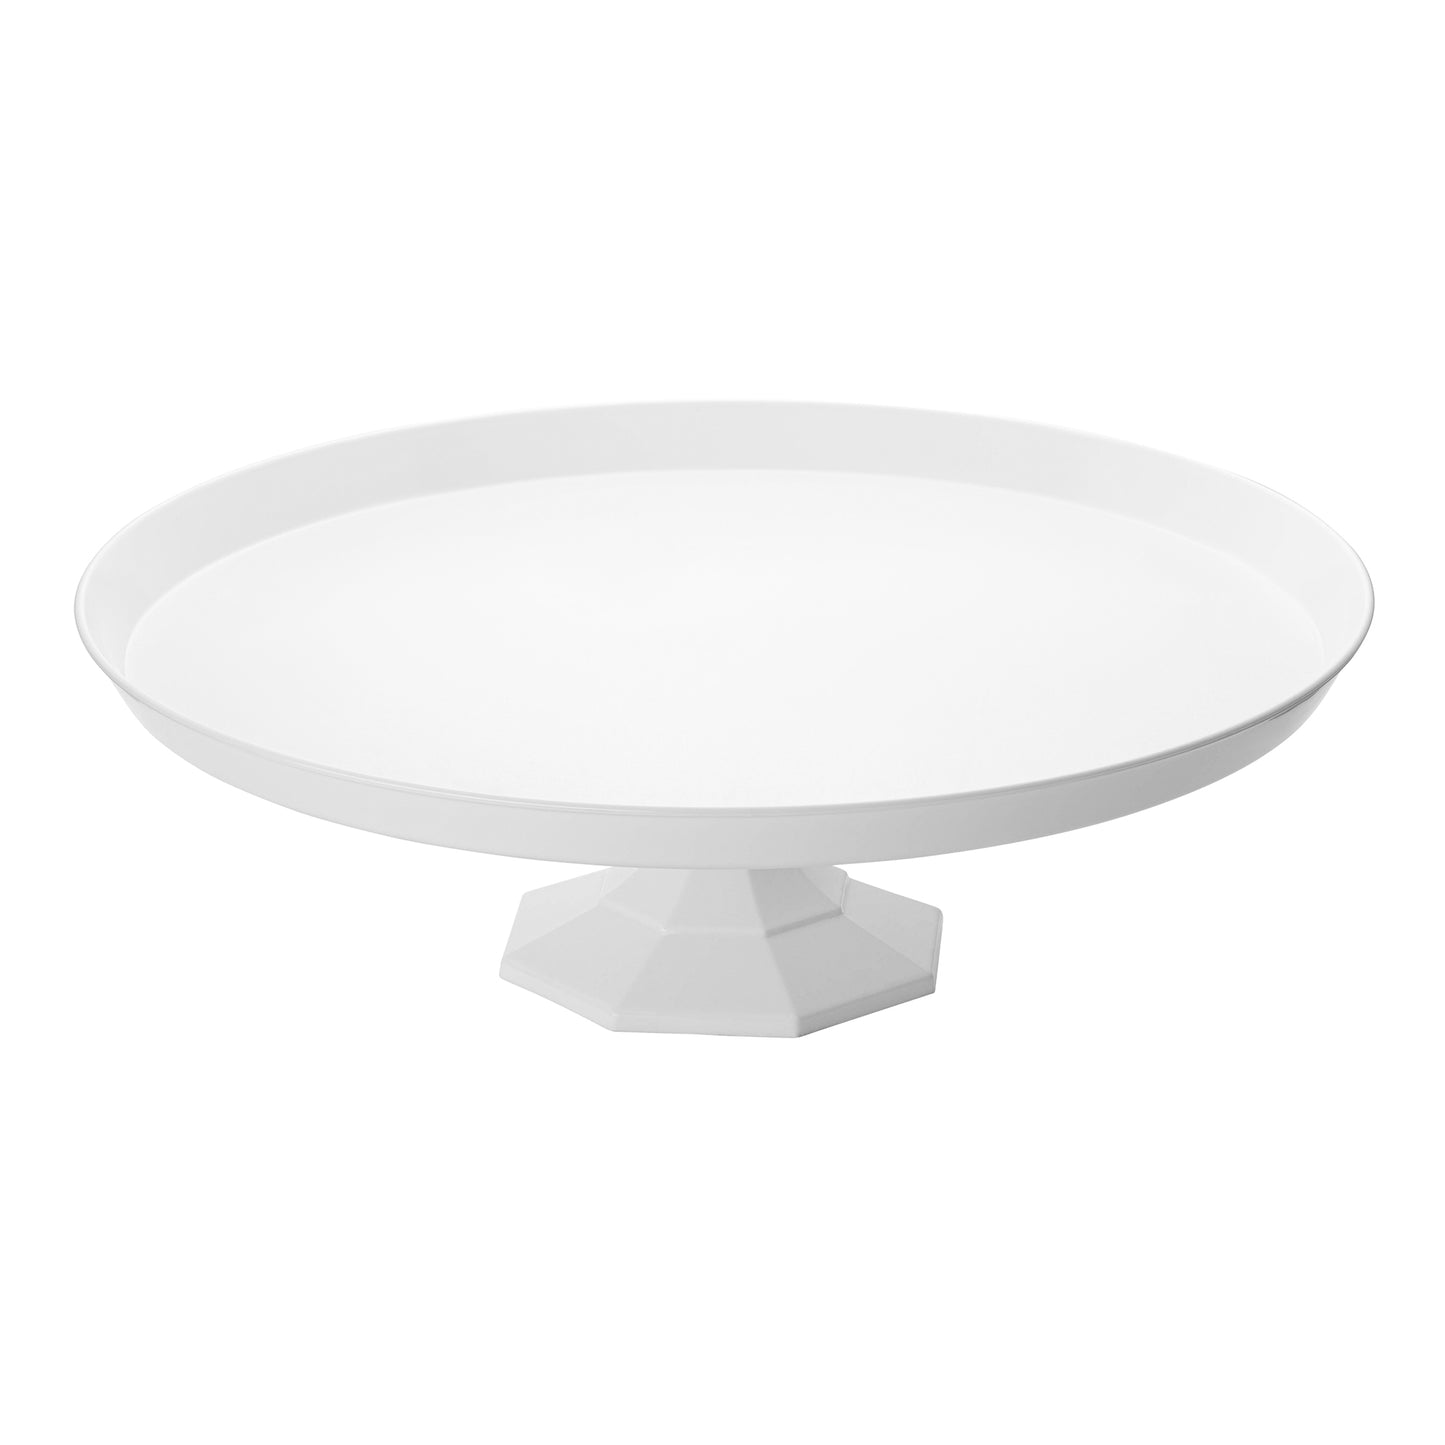 10.5" White Small Round Disposable Plastic Cake Stands